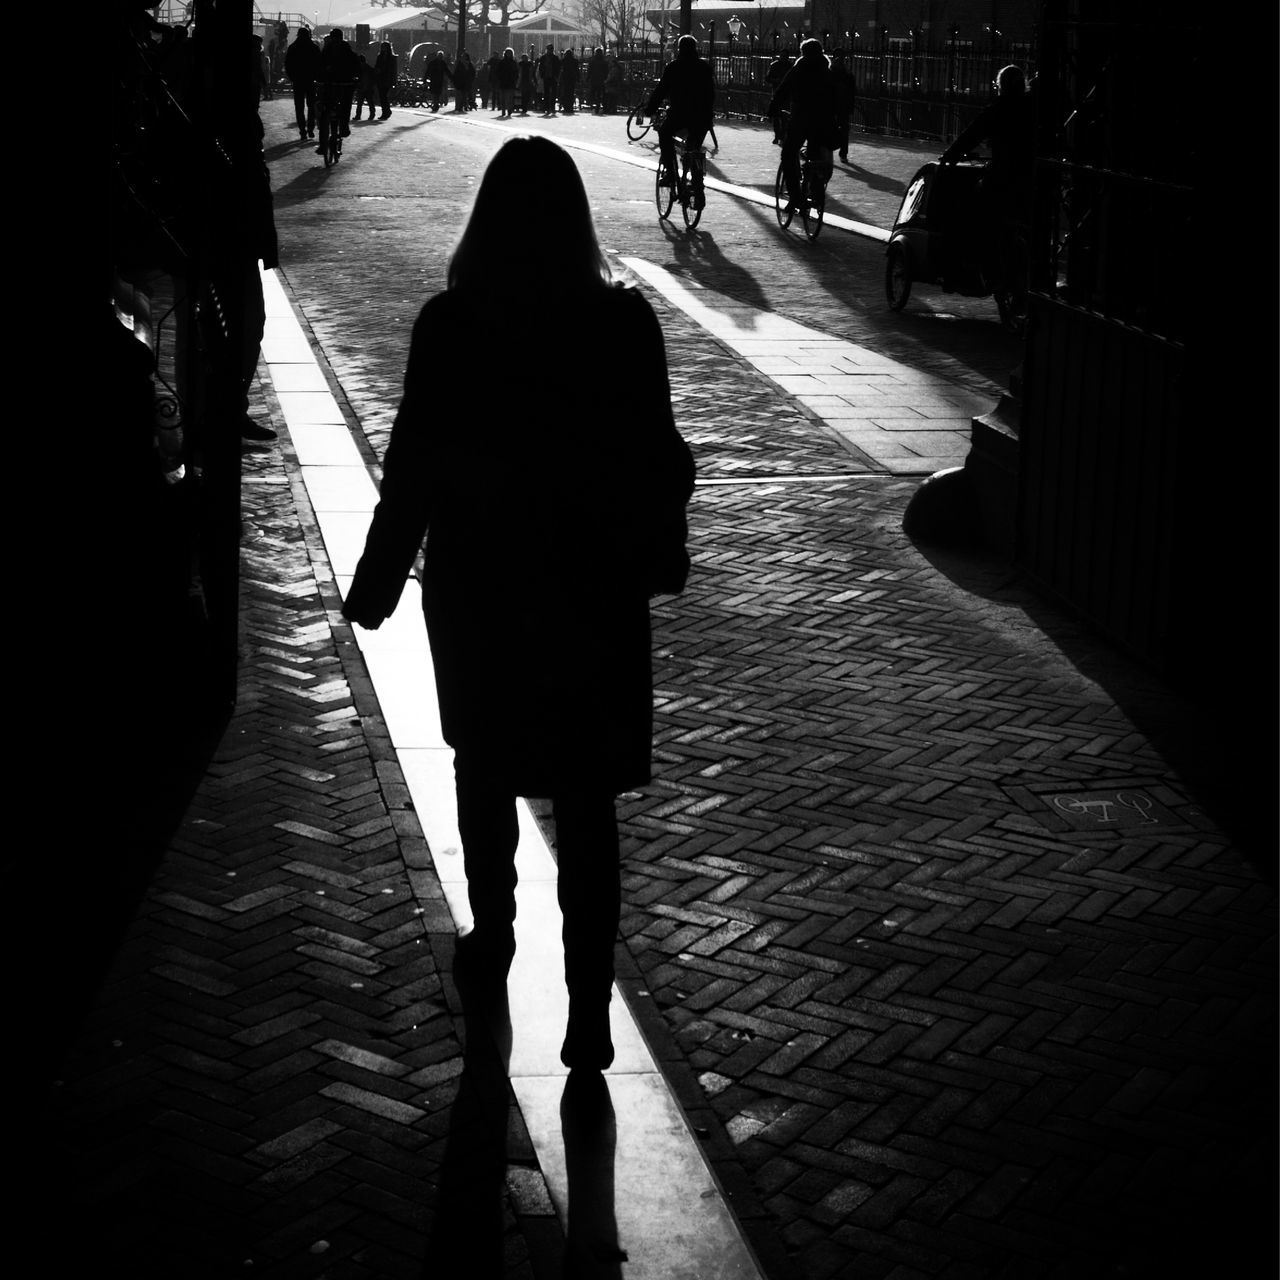 walking, real people, lifestyles, women, leisure activity, sidewalk, full length, silhouette, outdoors, men, day, city, pedestrian, low section, adult, people